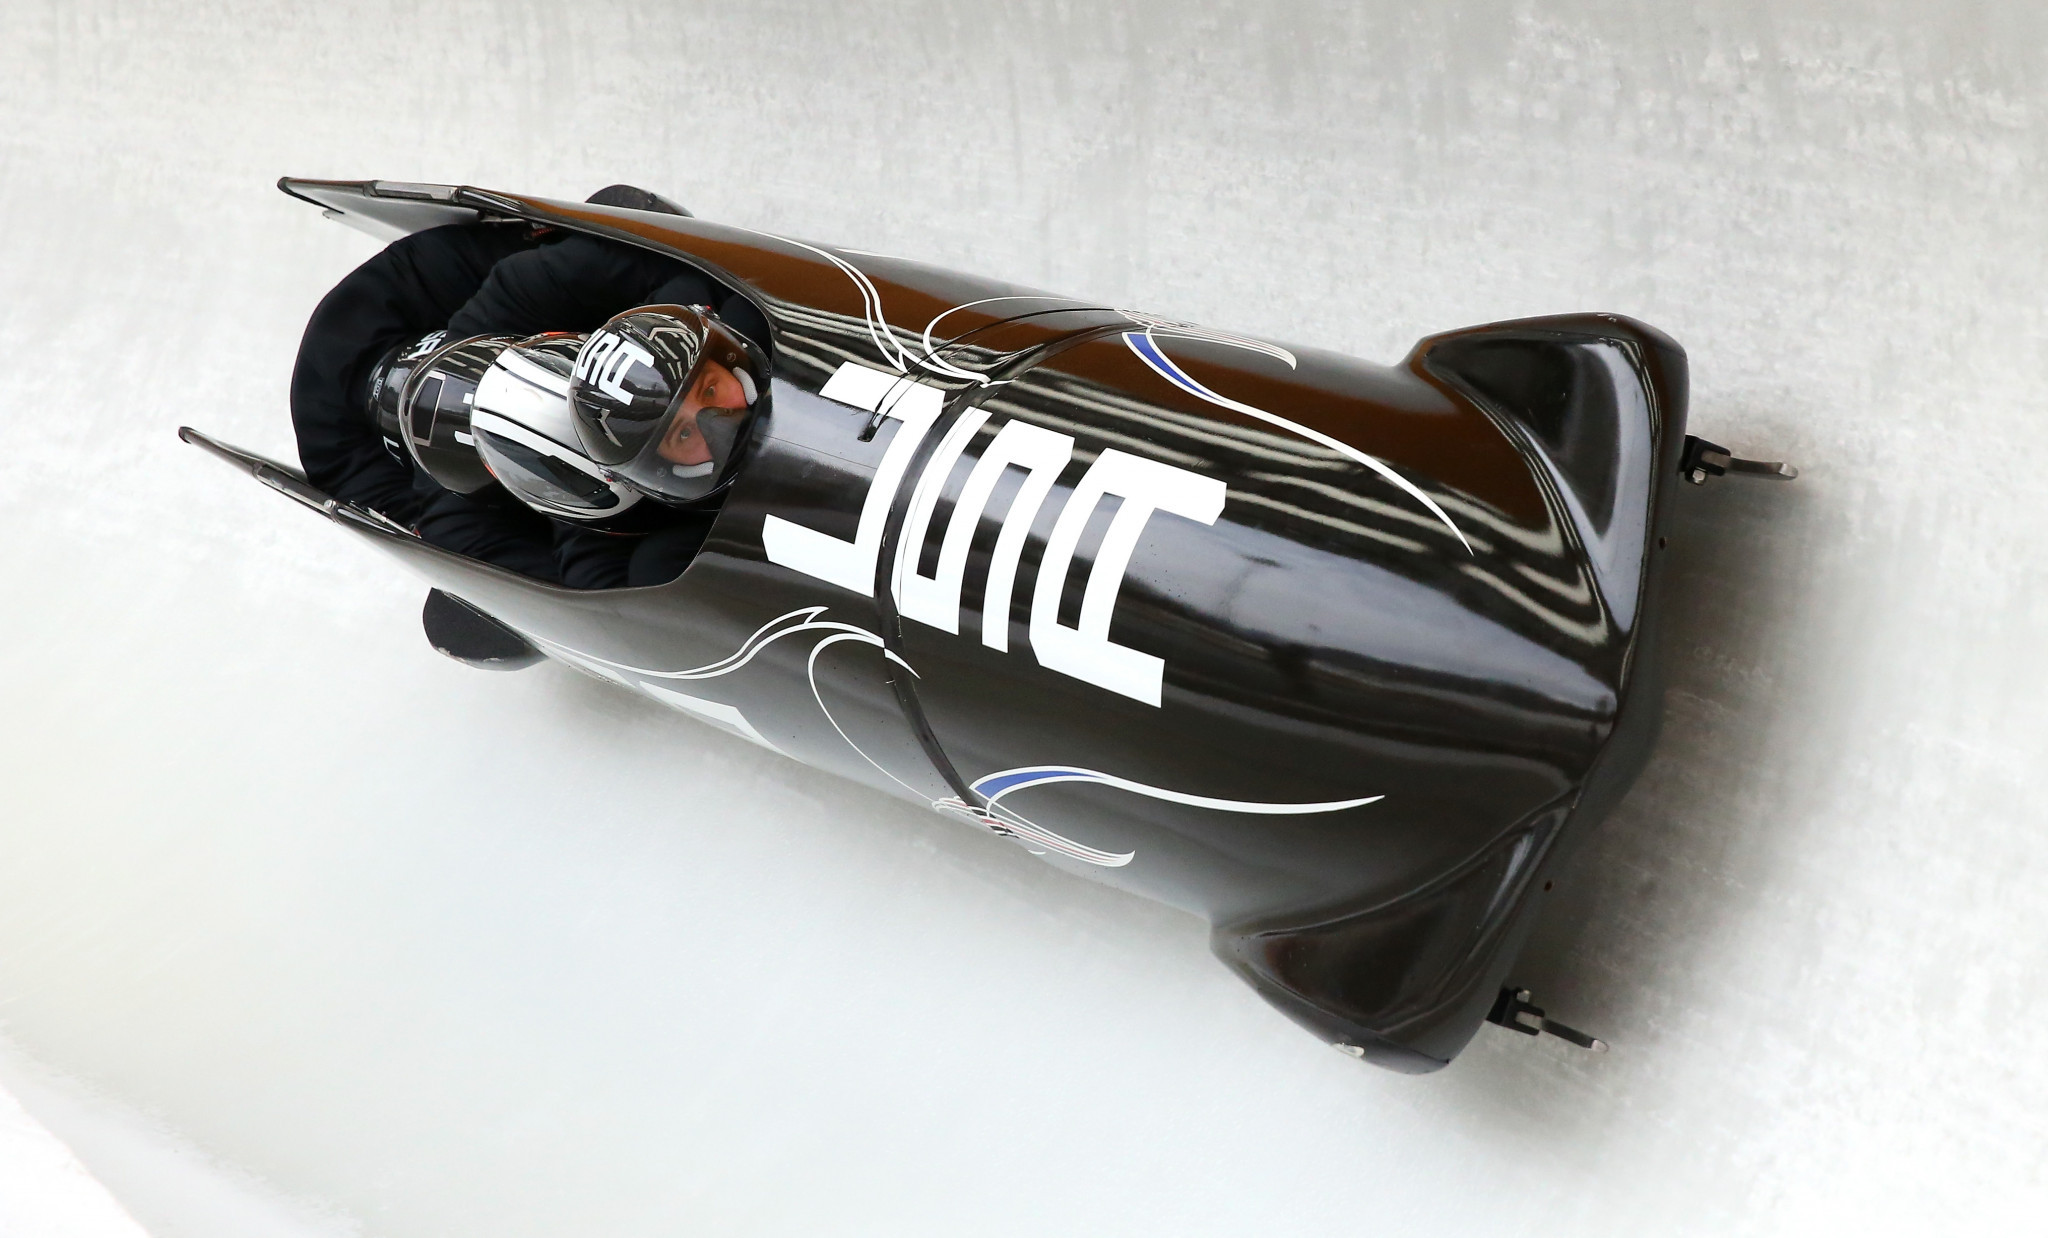 American sliders are backing calls for resignations at Bobsleigh Canada Skeleton  ©Getty Images